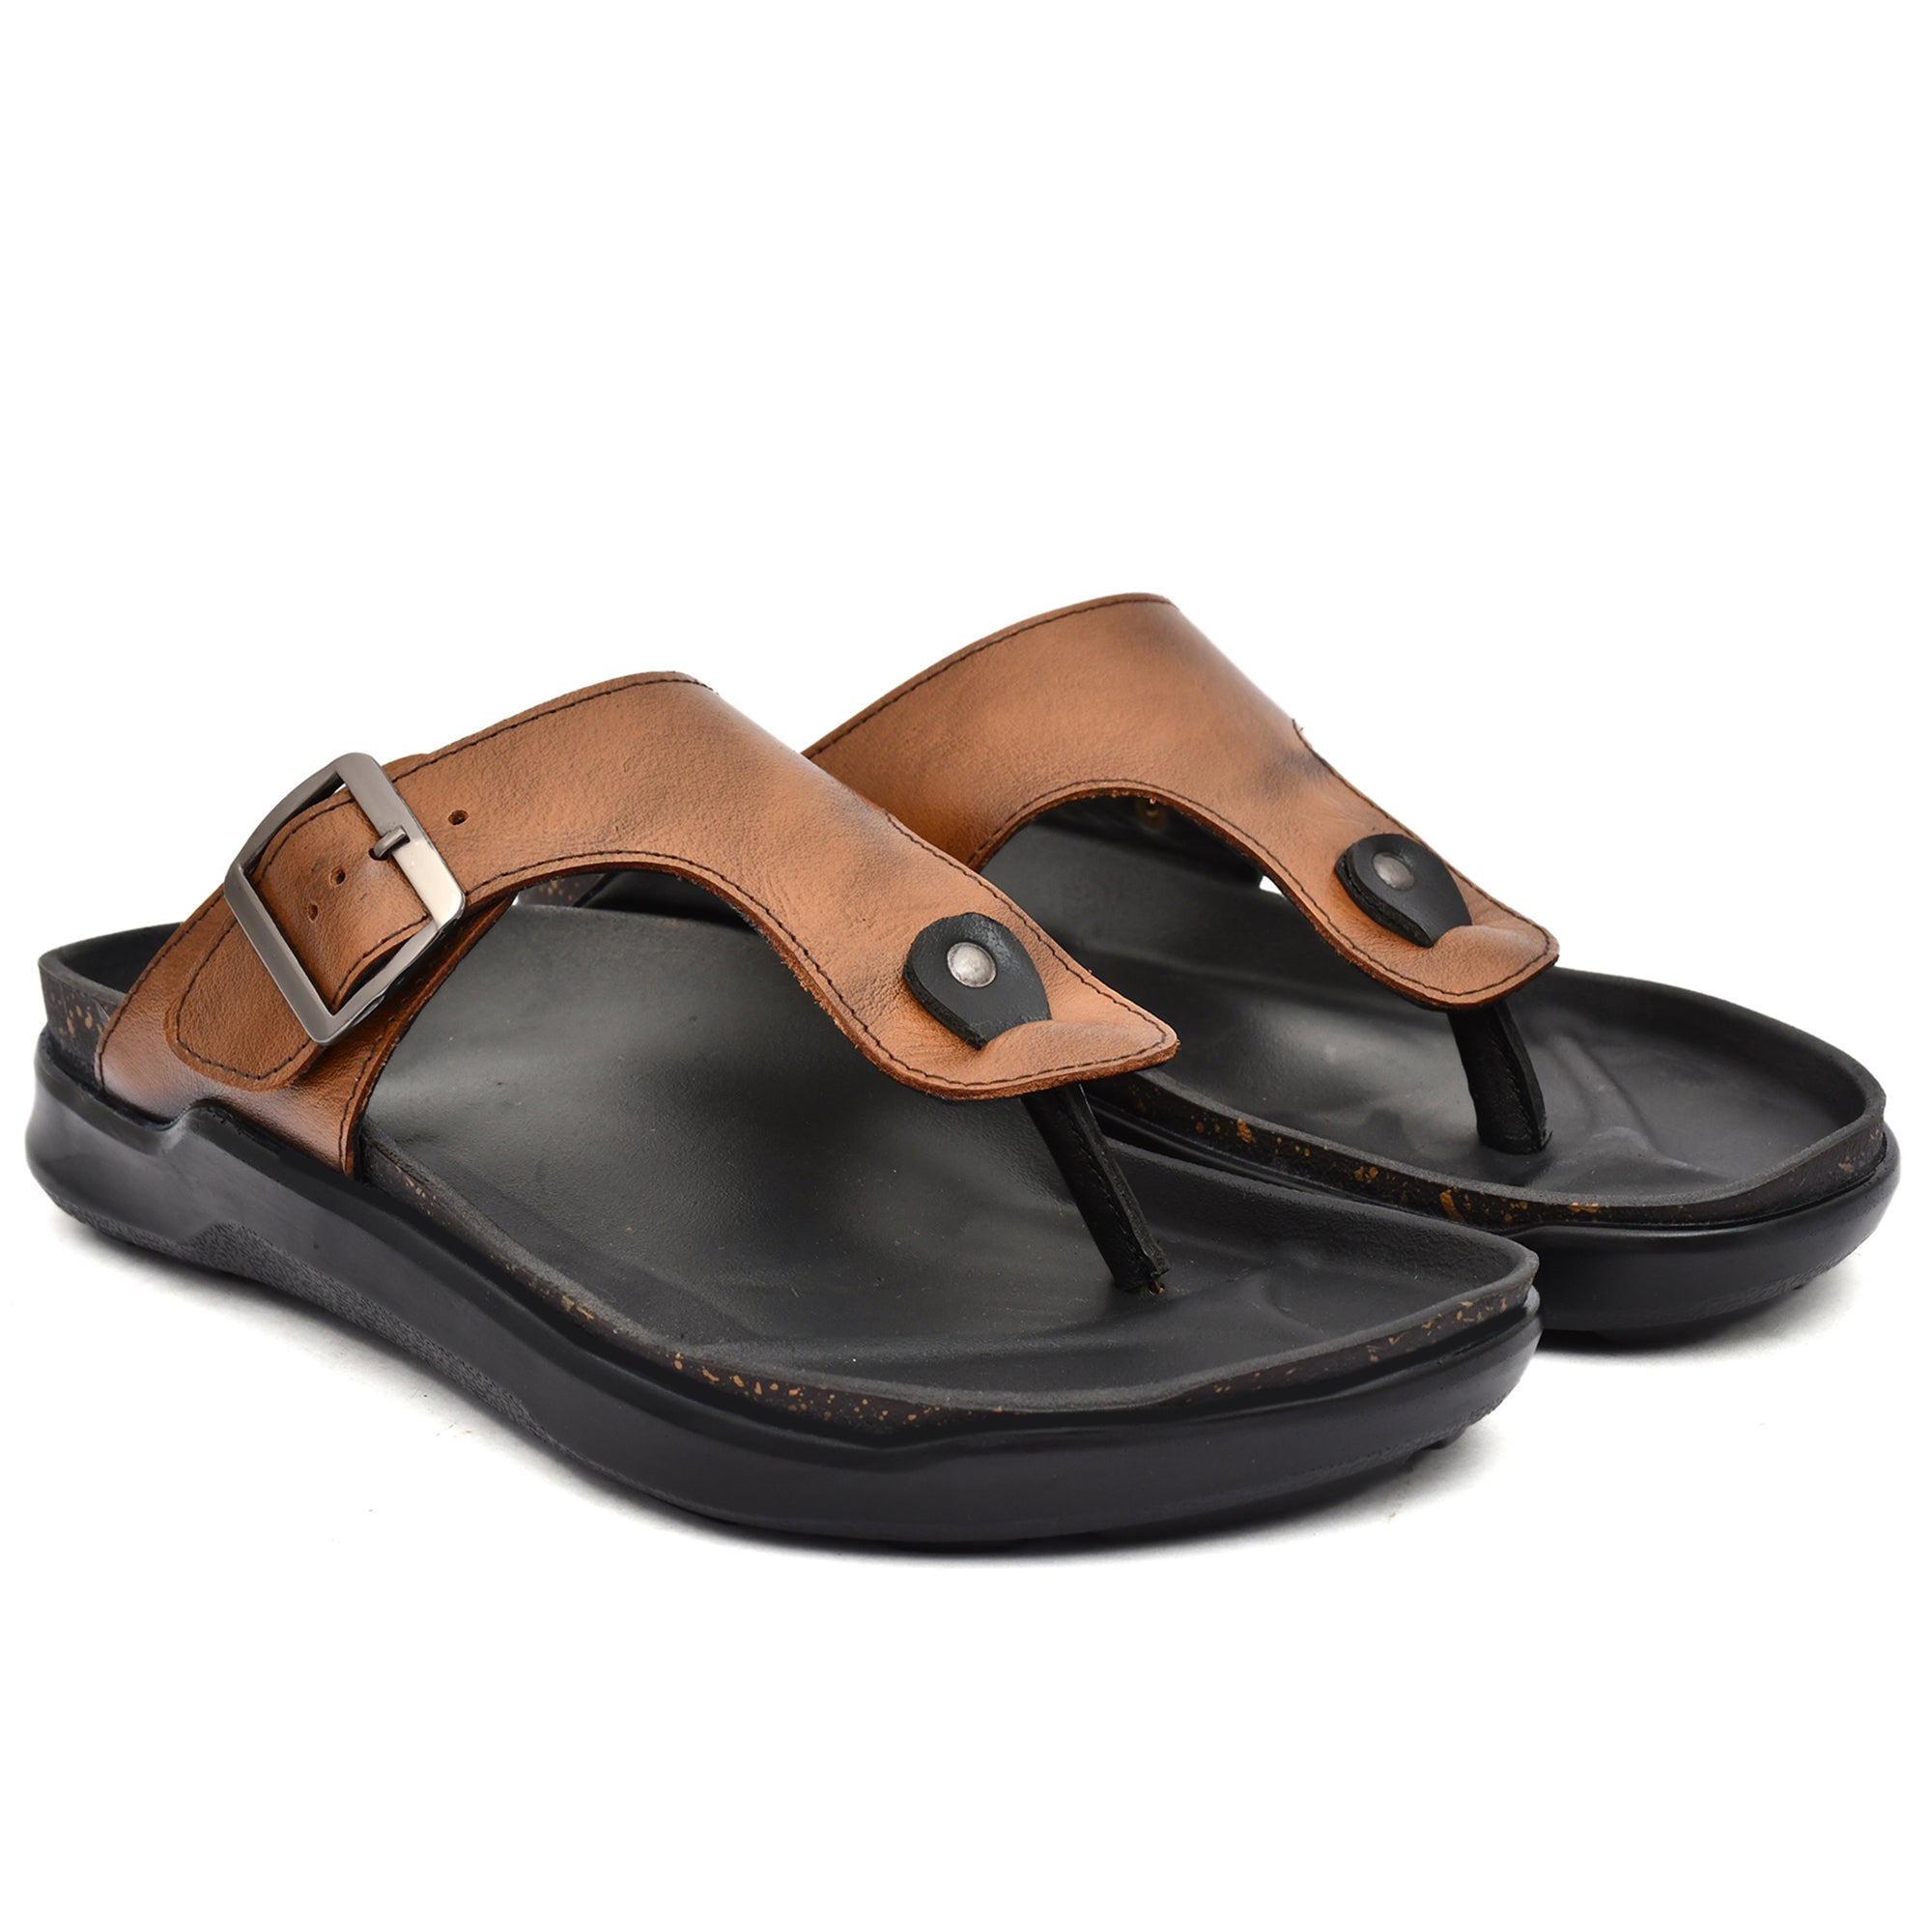 Leather Slipper for men's countrymaddox